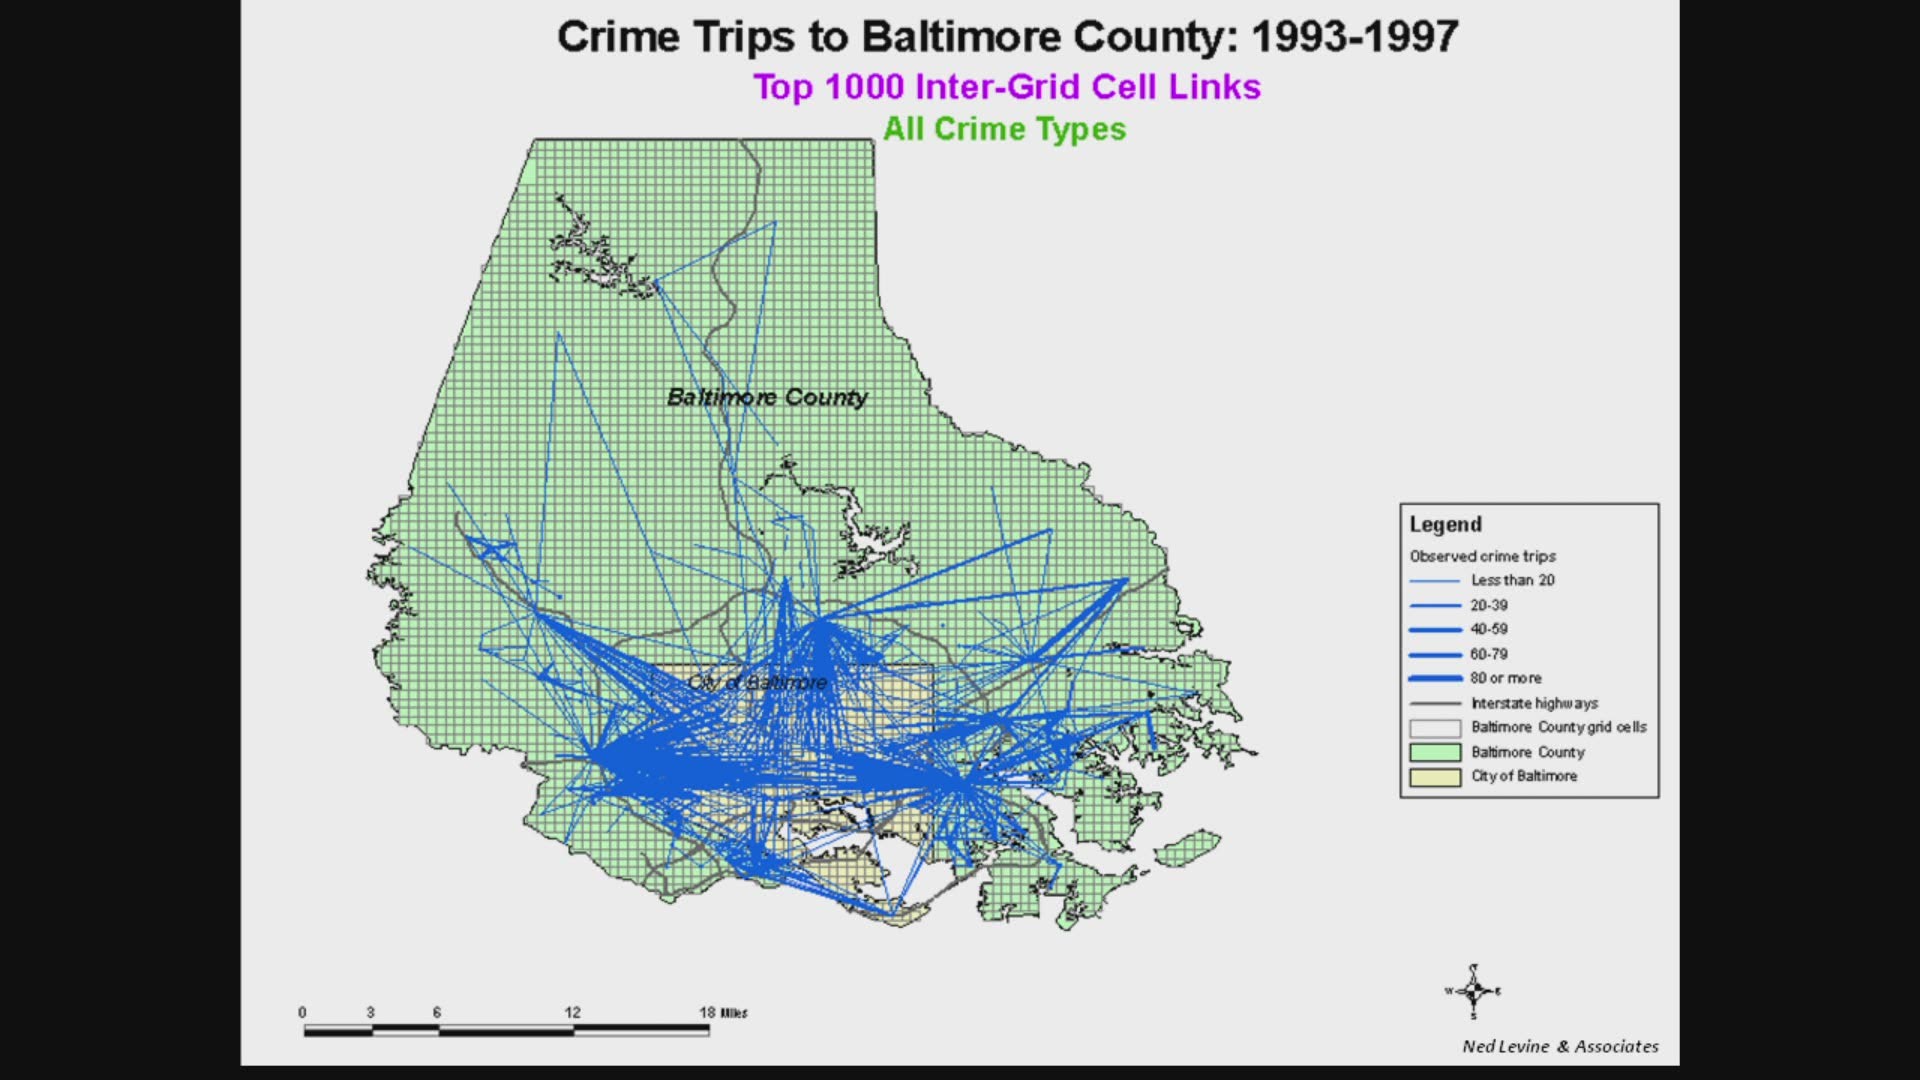 We look at the data to show how police force effected crime rates over the years.